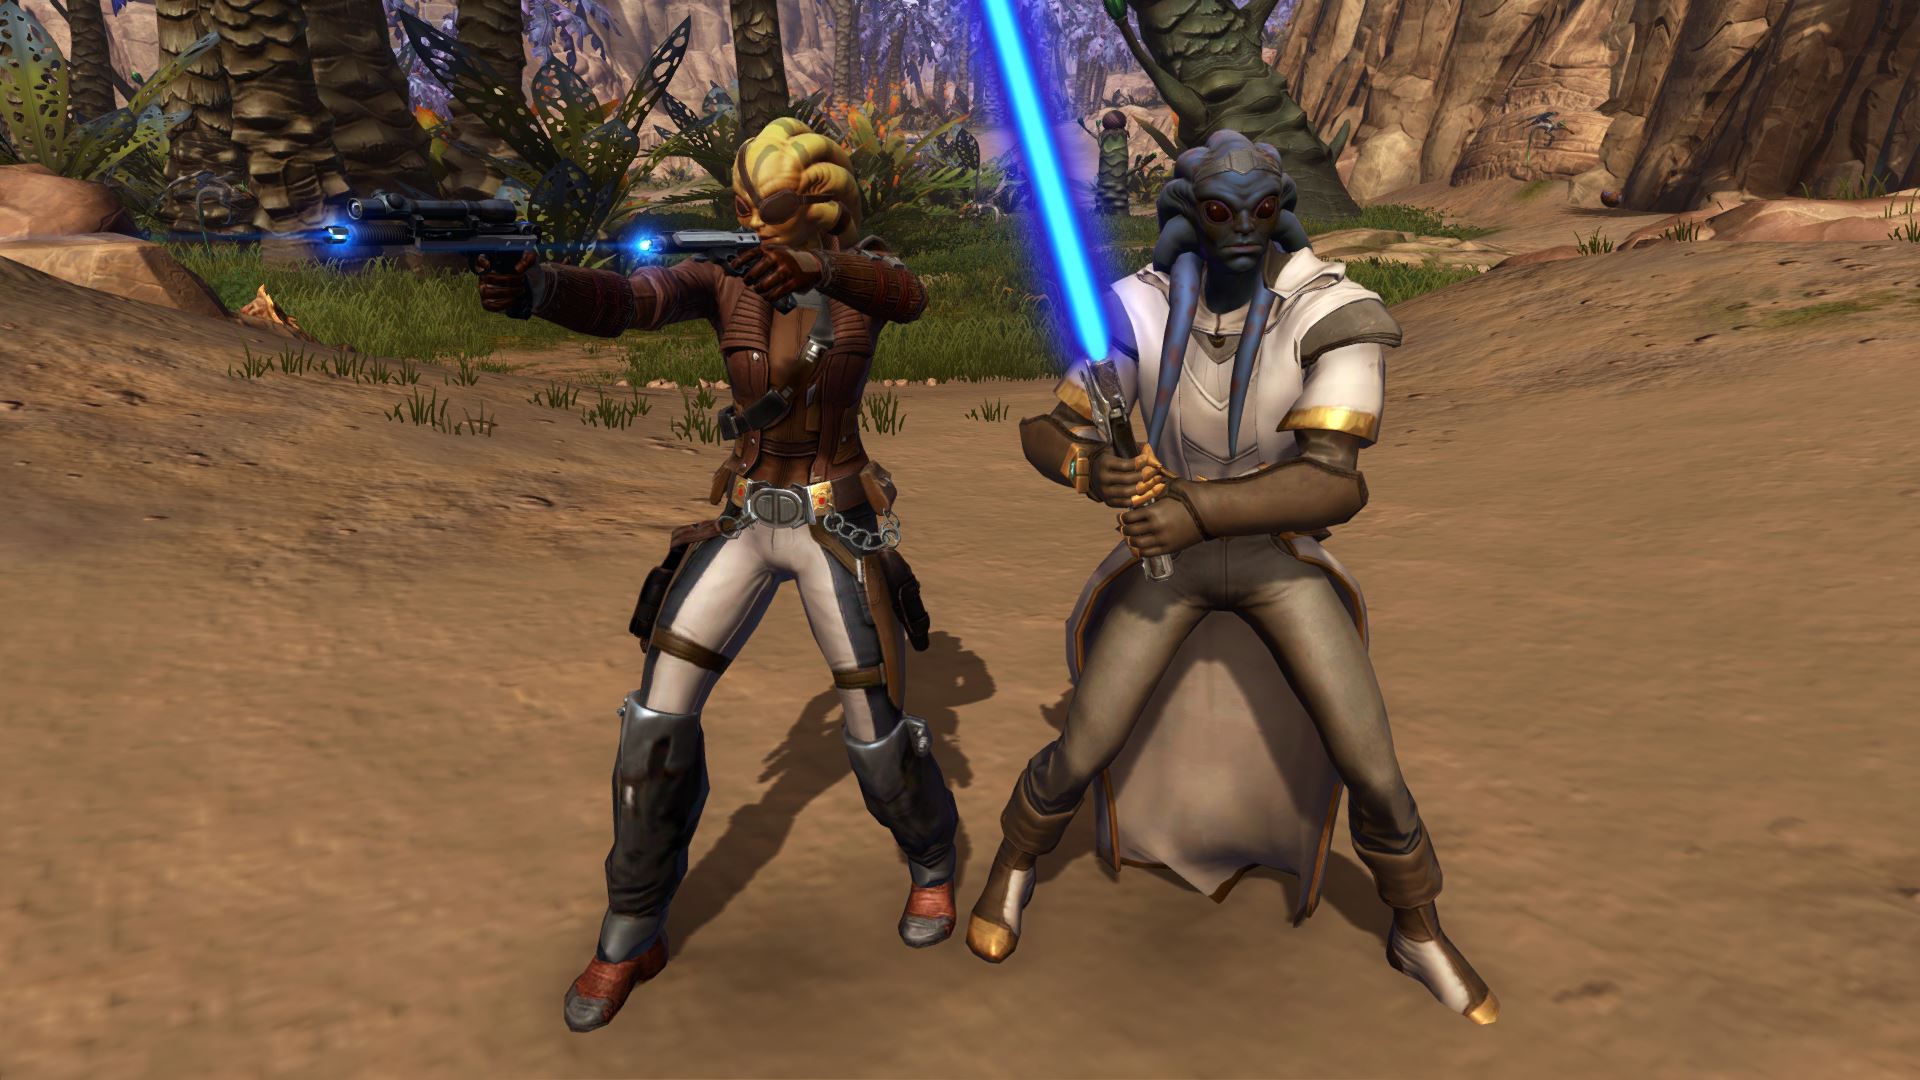 The Old Republic are just two days away from the launch of #SWTOR Onslaught! With the expansion, Nautolans will be added as a new playable species